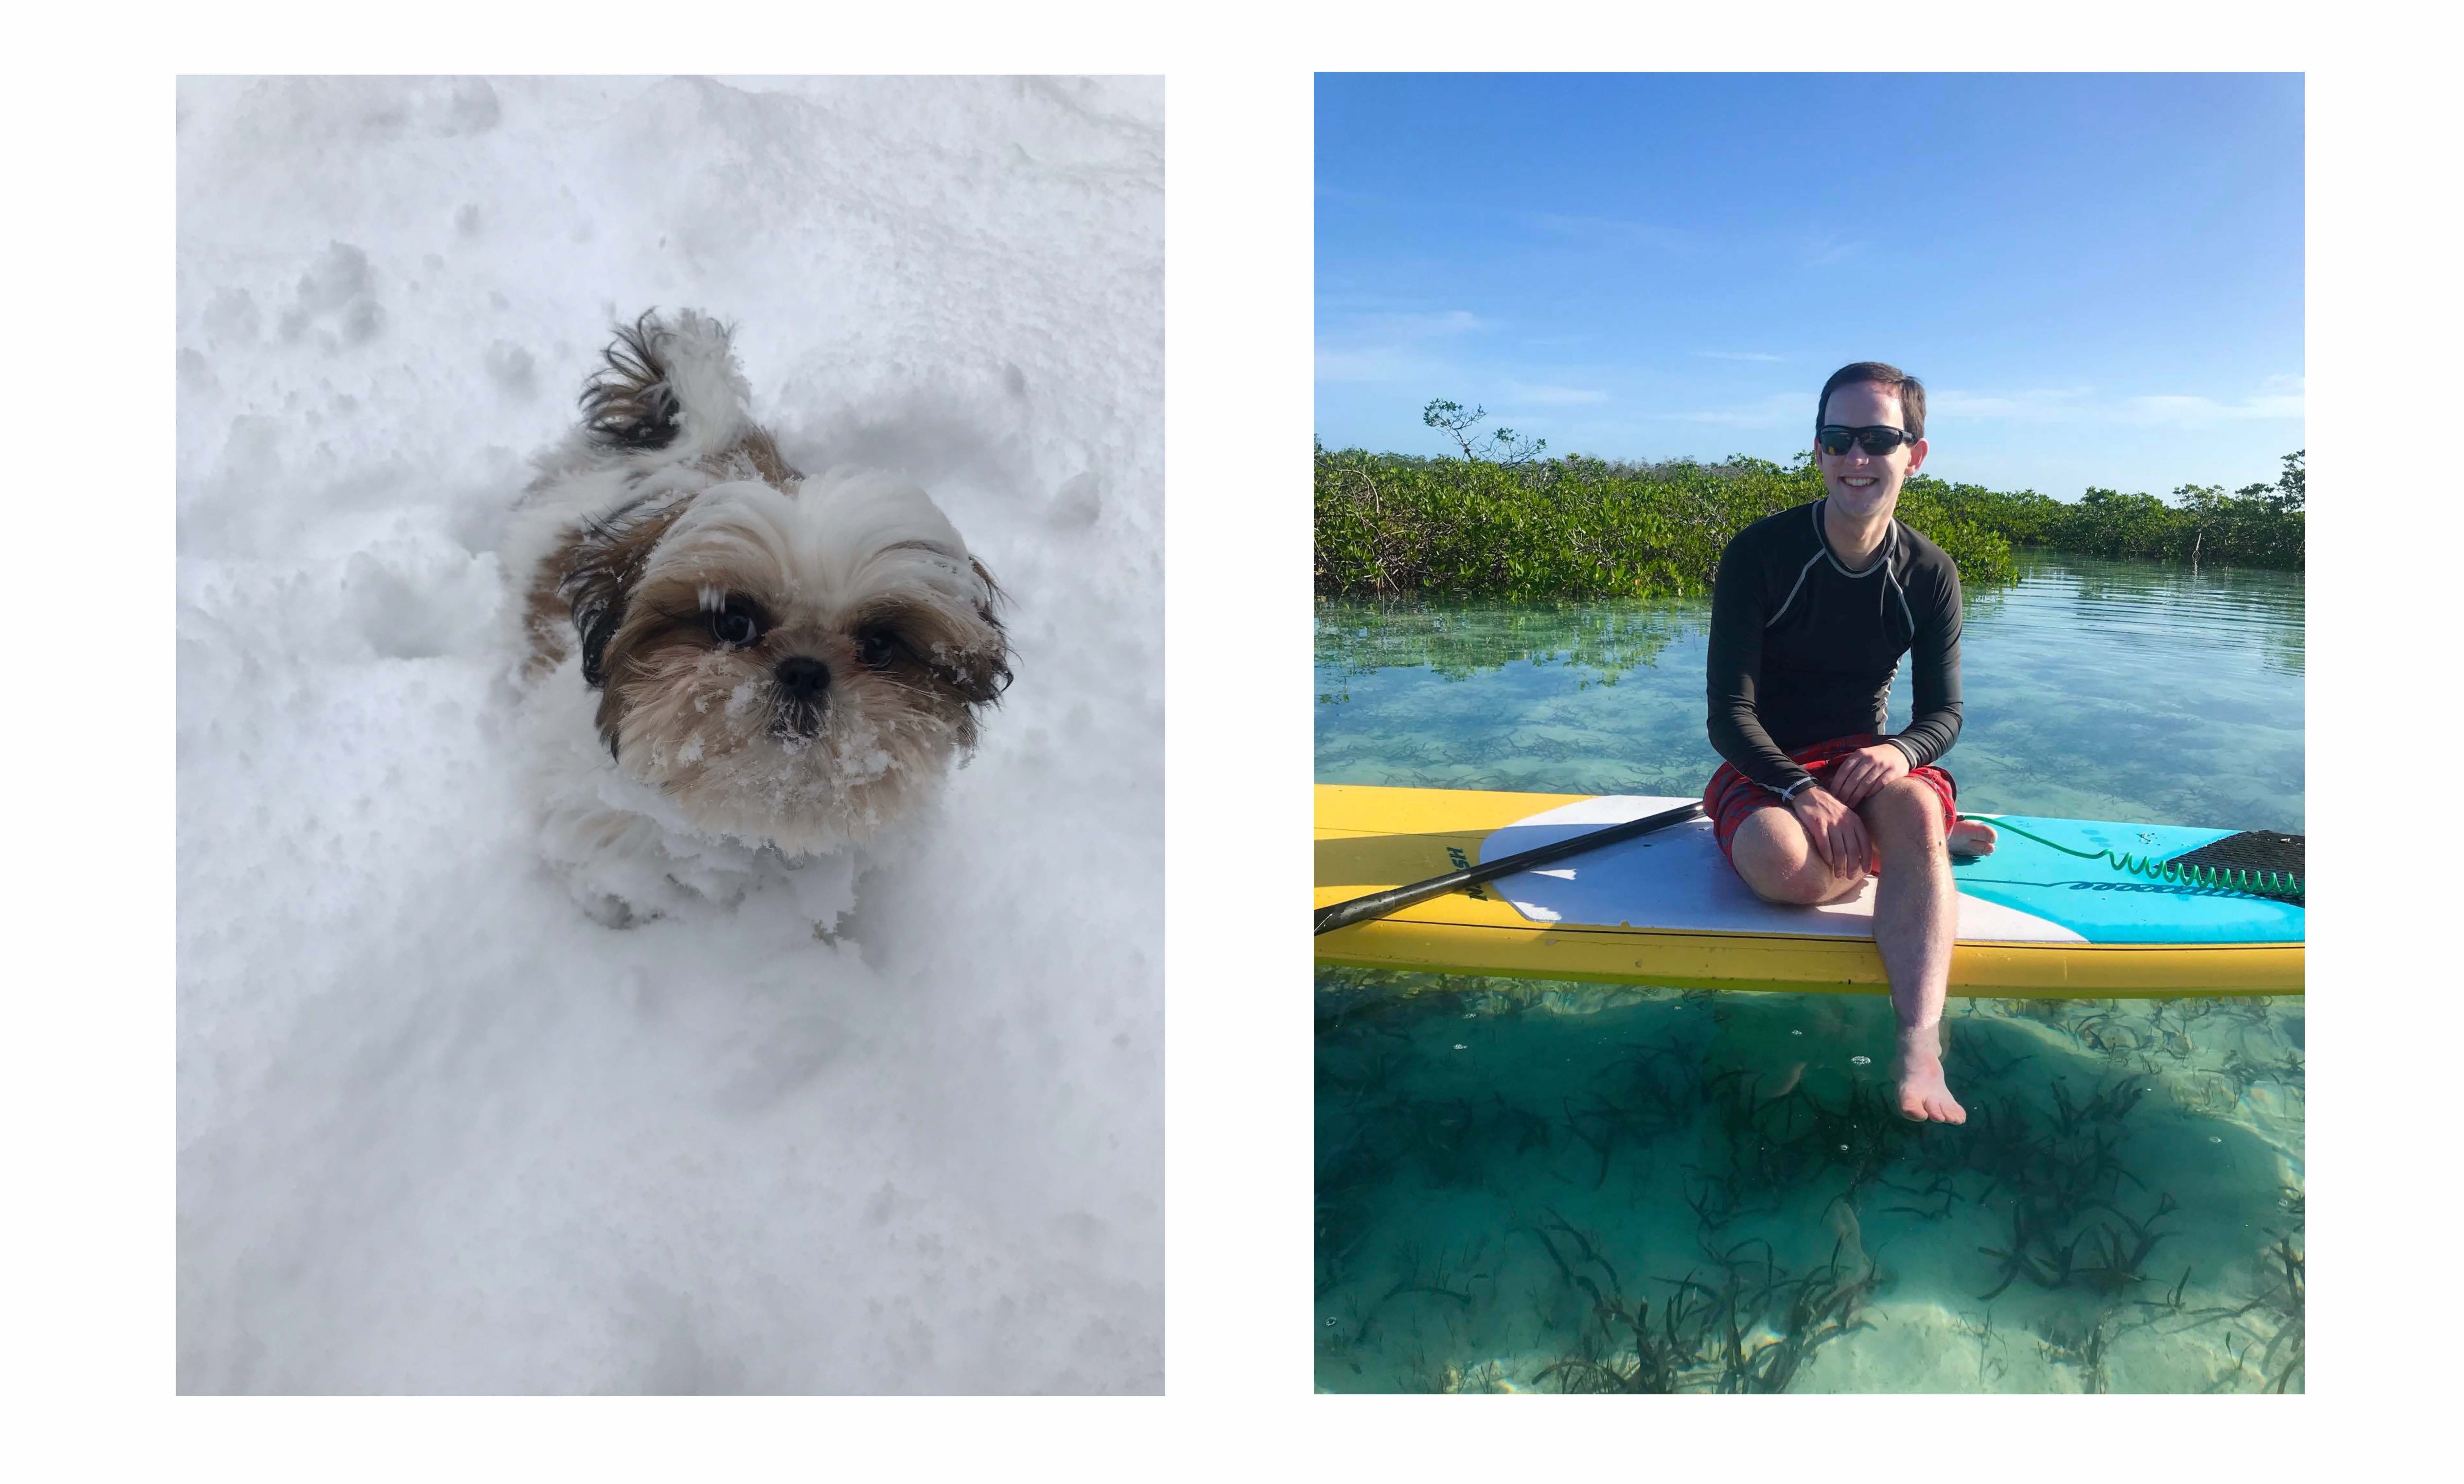 Collage of Dr. Benert's new puppy and him paddle-boarding.